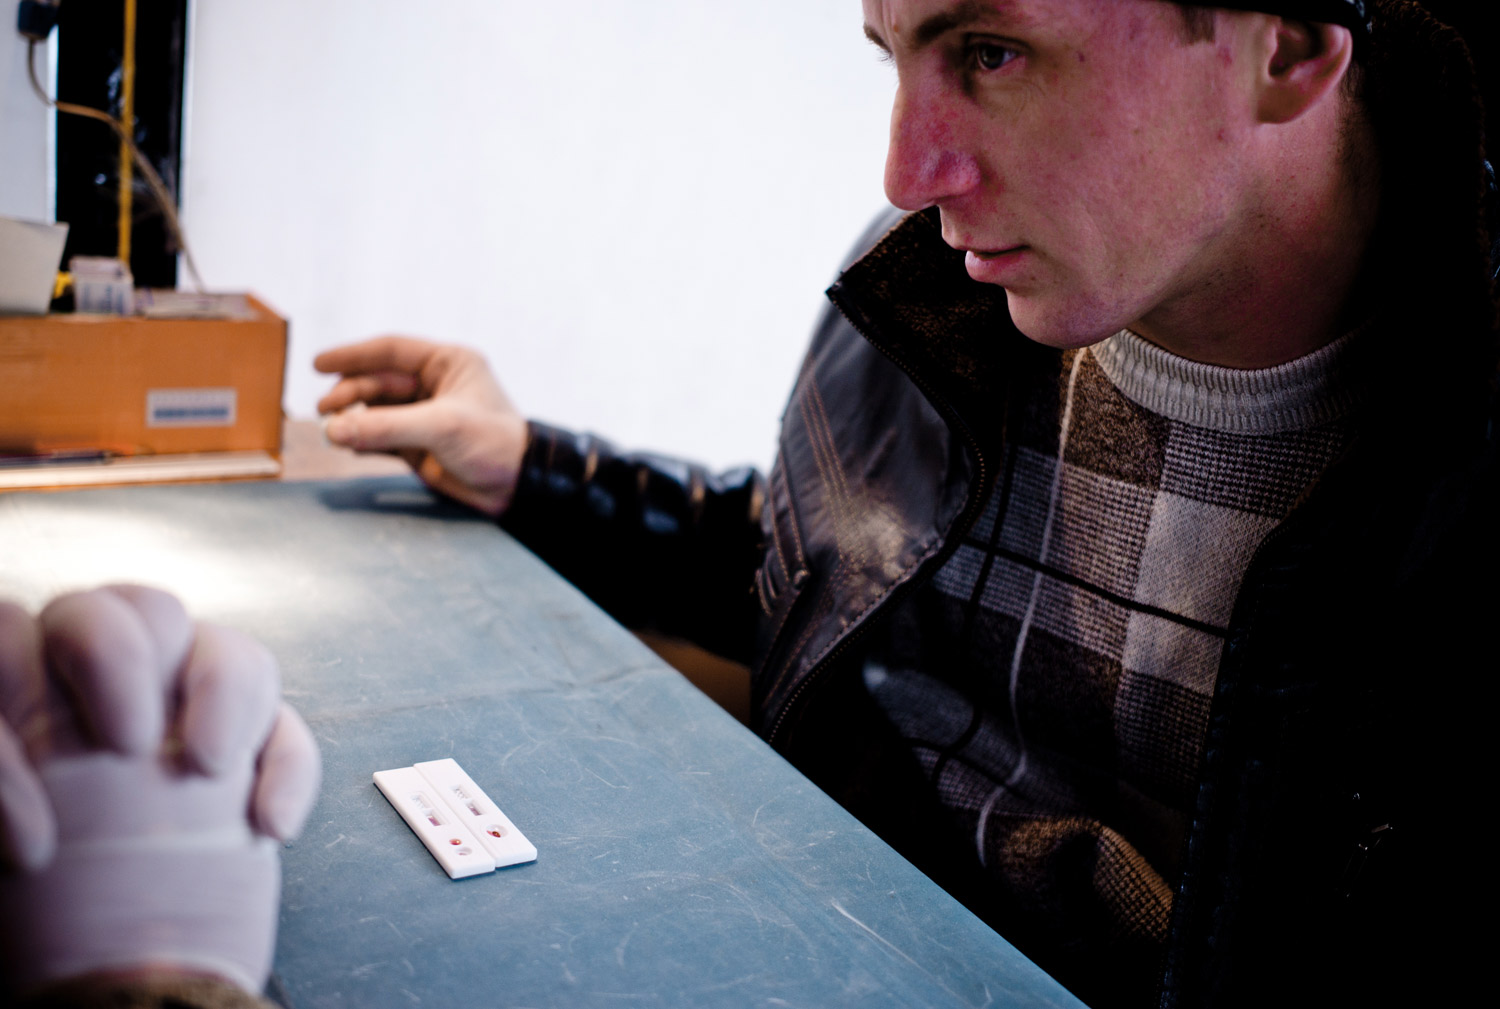 At a mobile facility organized by Amicus, an NGO offering comprehensive care for people living with HIV/AIDS, patients can exchange needles and get blood tests. A high rate of HIV/AIDS has also contributed to the spread of TB in the Ukraine, as the compromised immune systems of HIV patients make them susceptible to the disease's predatory ways.